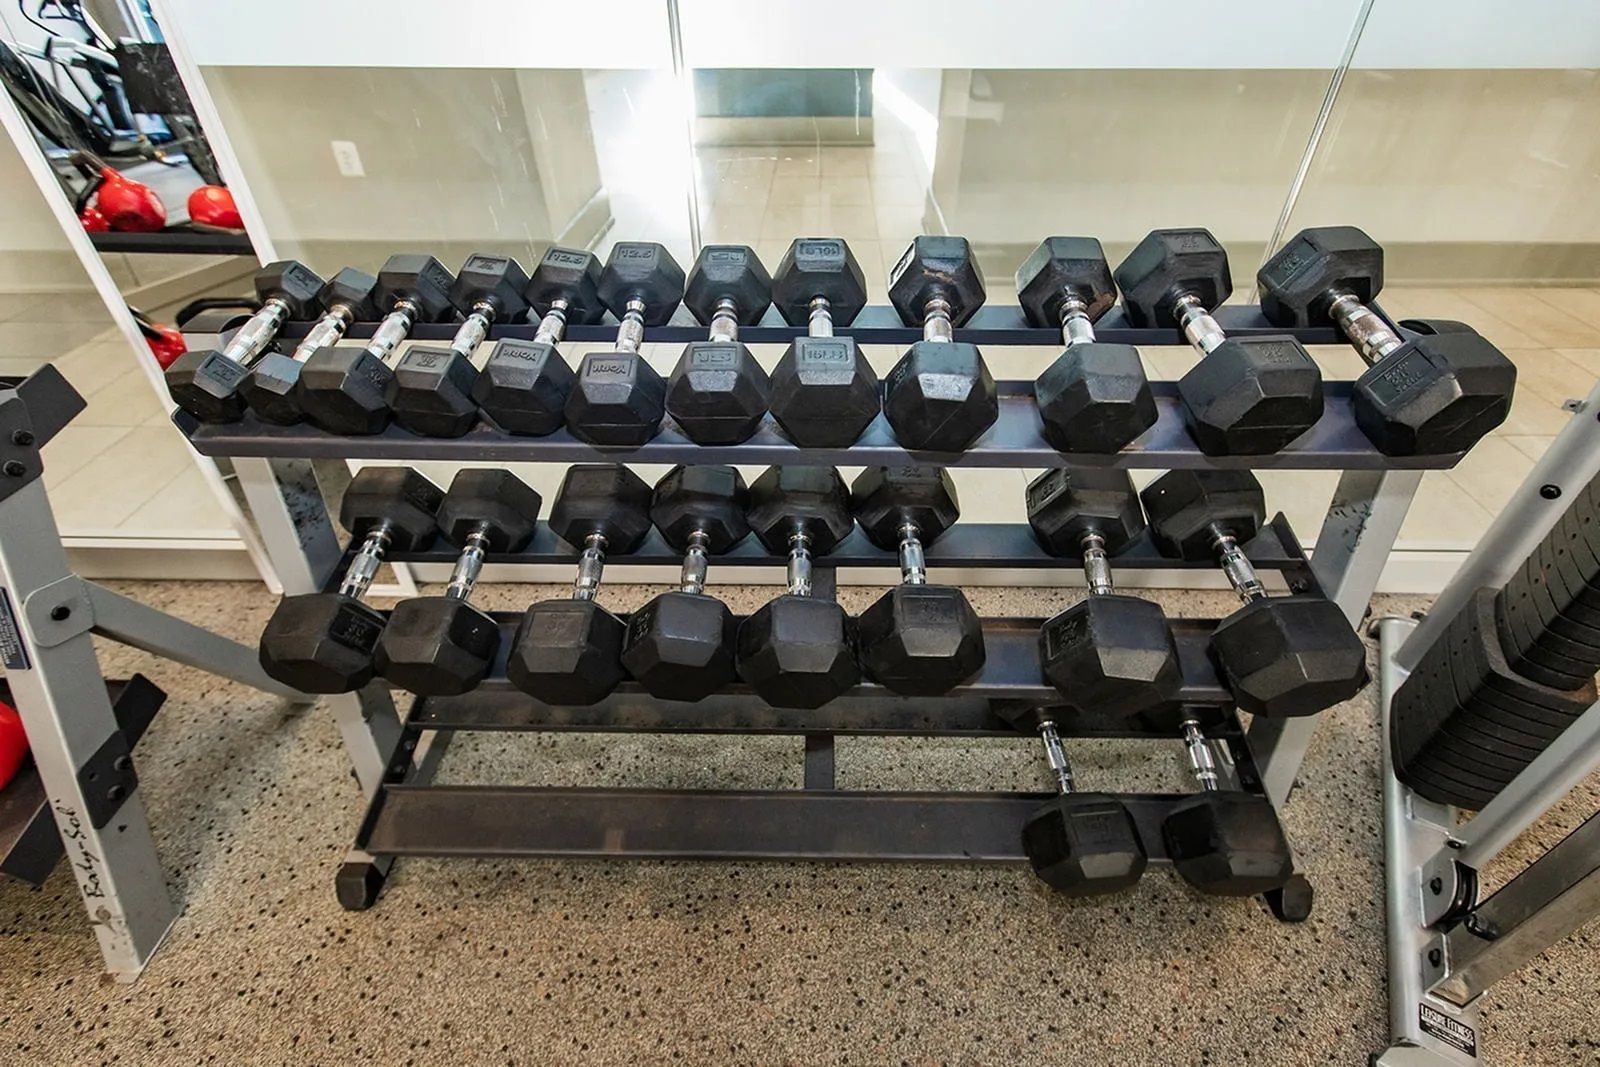 Fitness center weight rack at The Southerly.